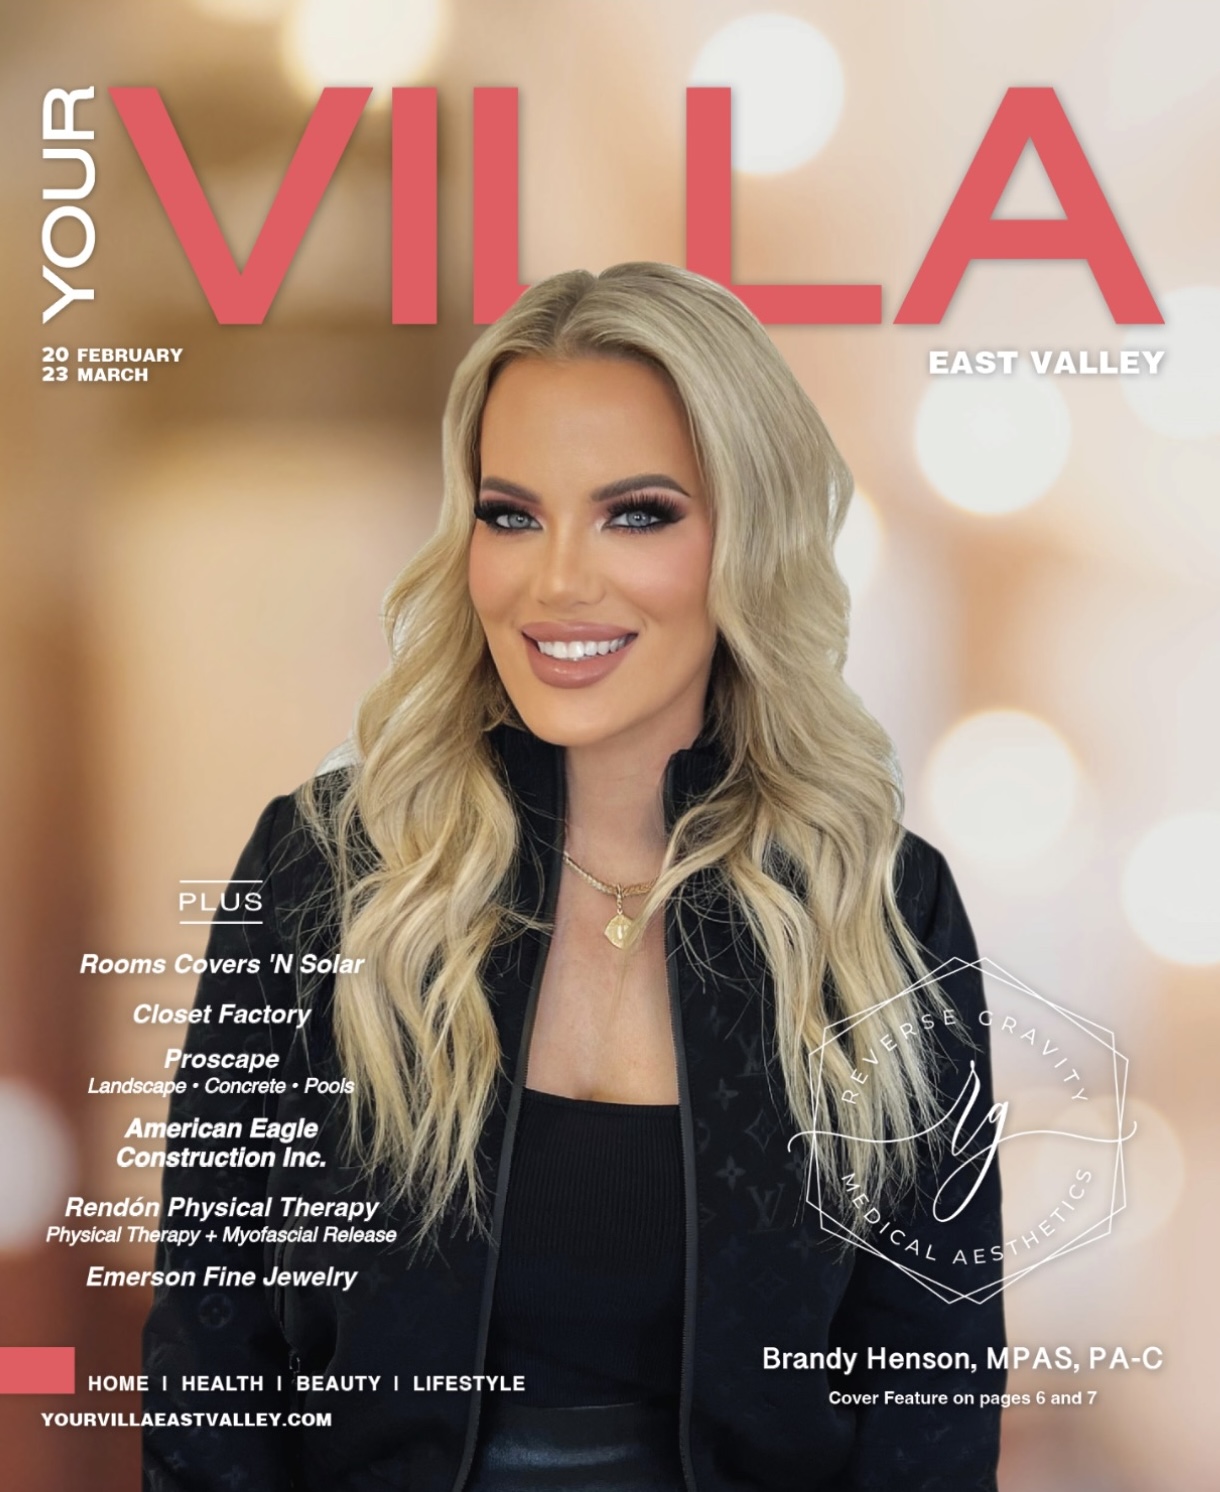 Brandy Henson on the Cover of "Your Villa East Valley" Magazine, February-March 2023